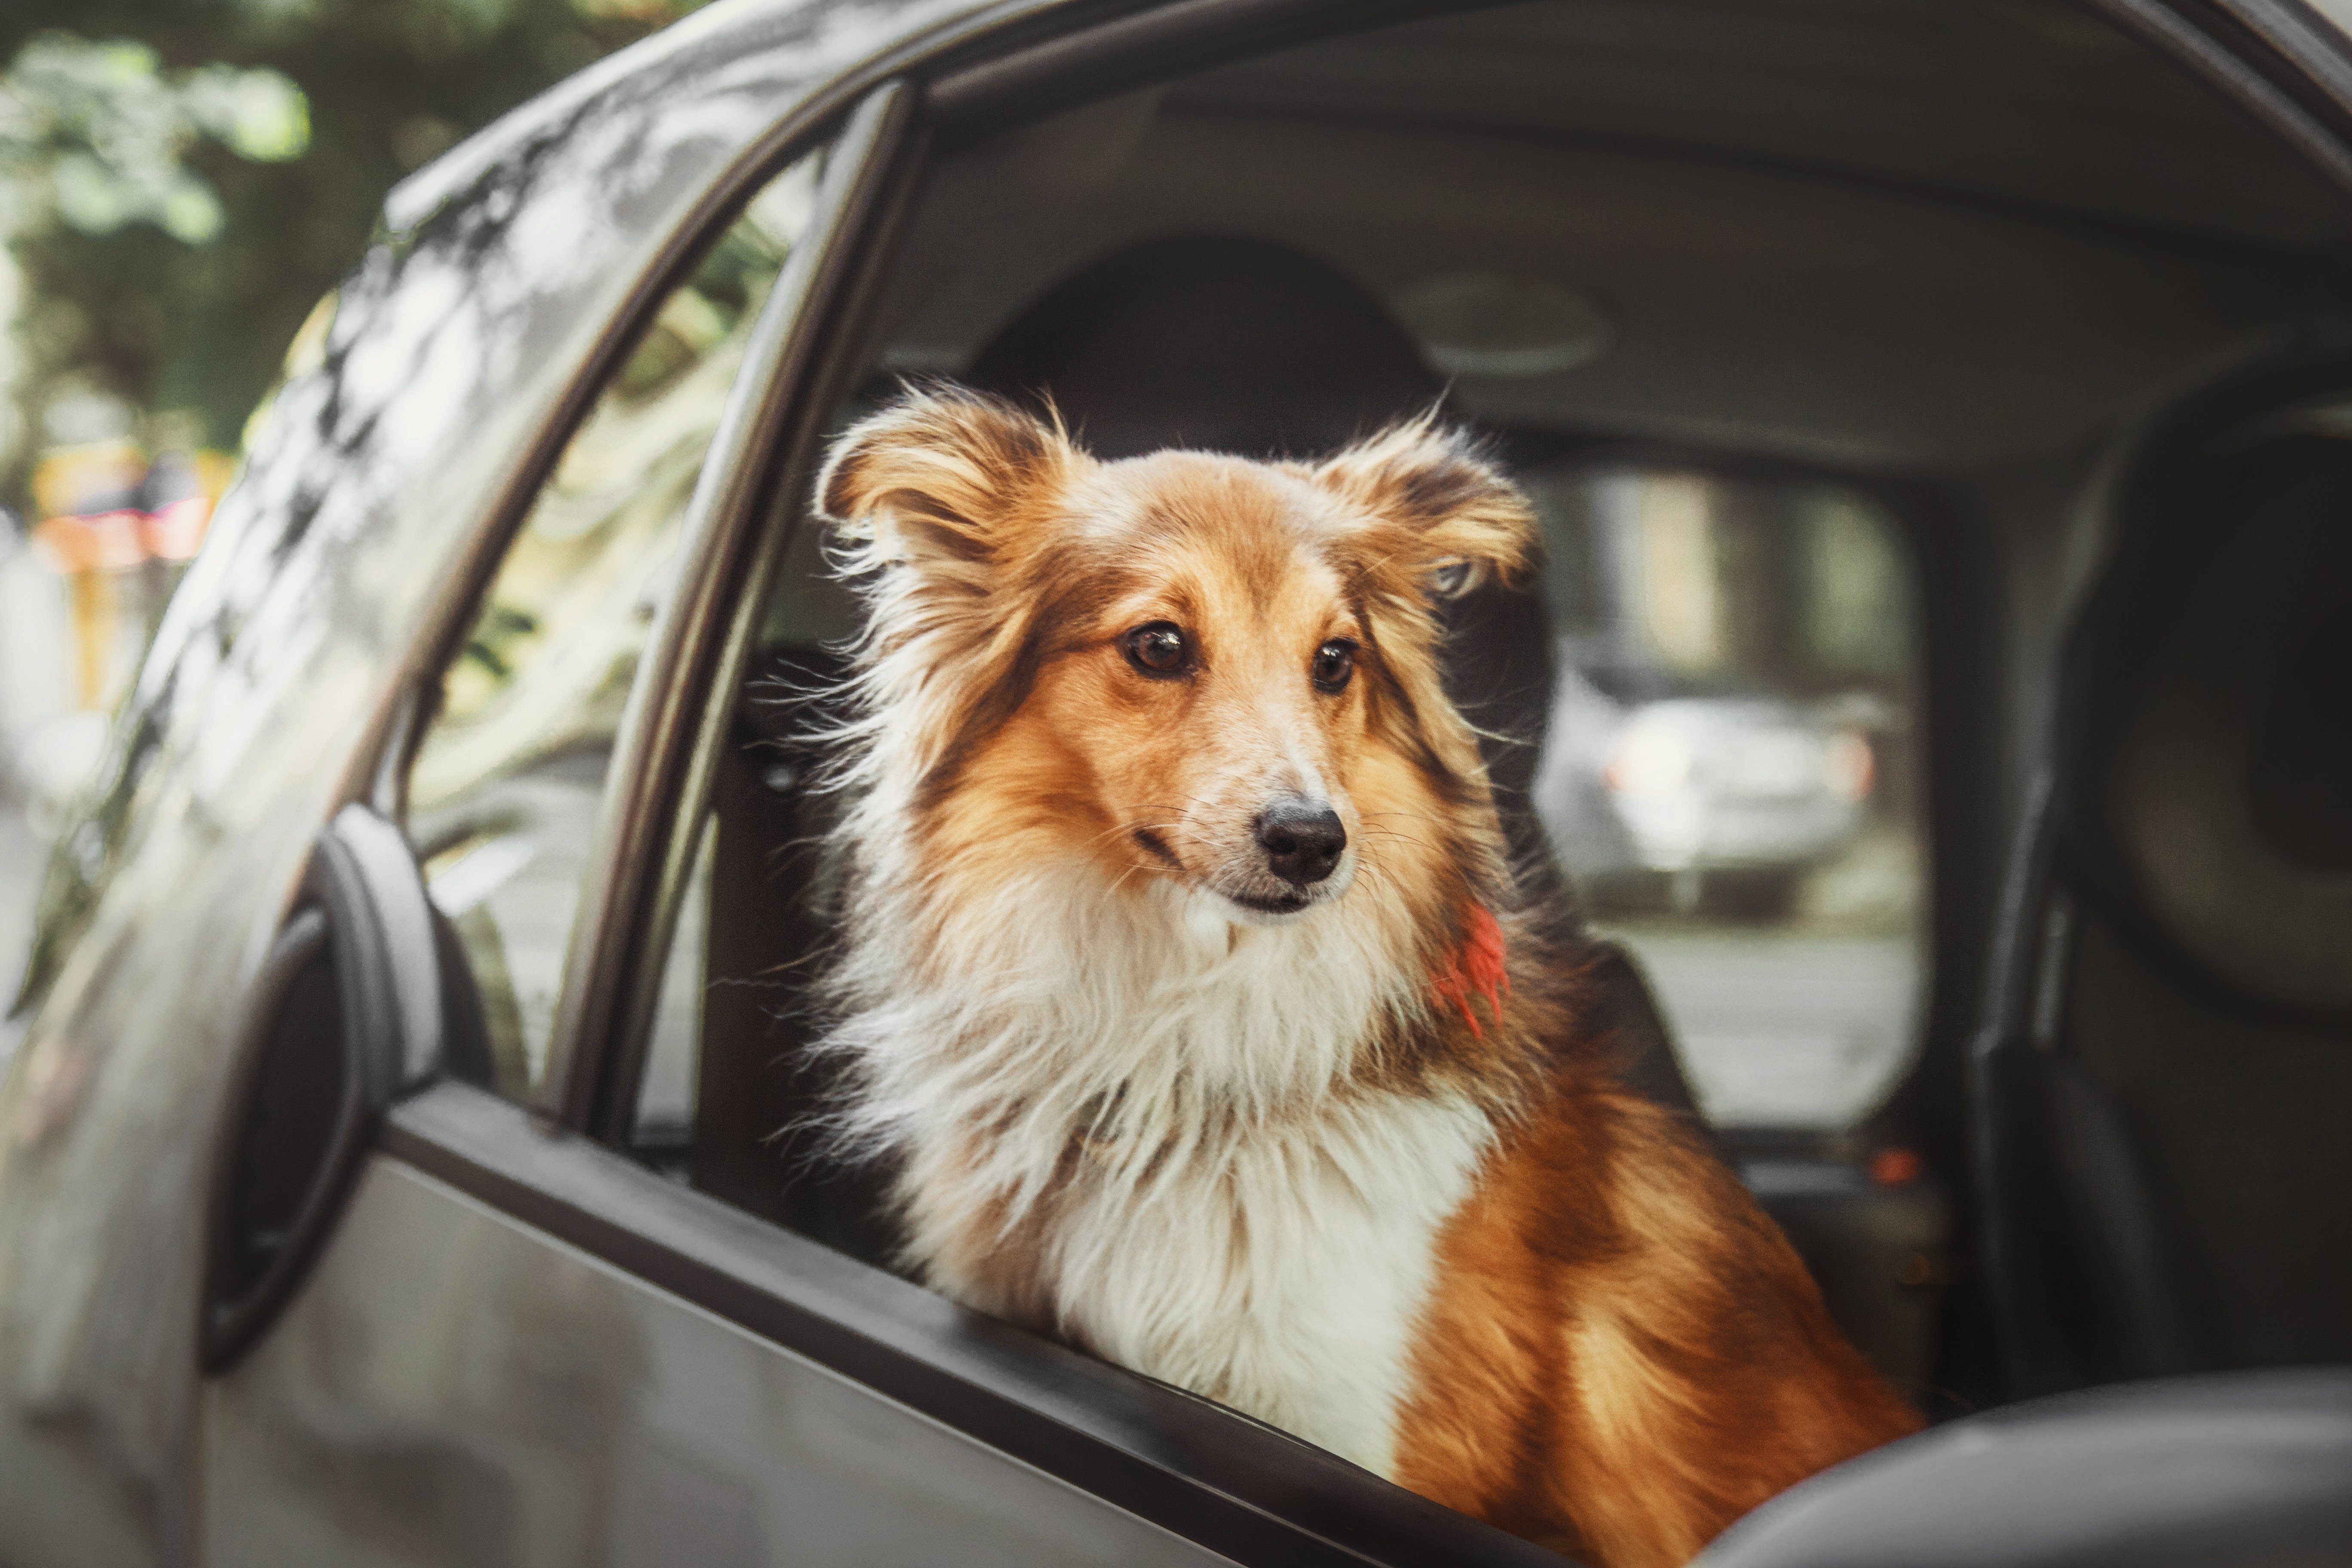 Two dogs at the car. German shephered dog and Shetland Sheepdog inside the car